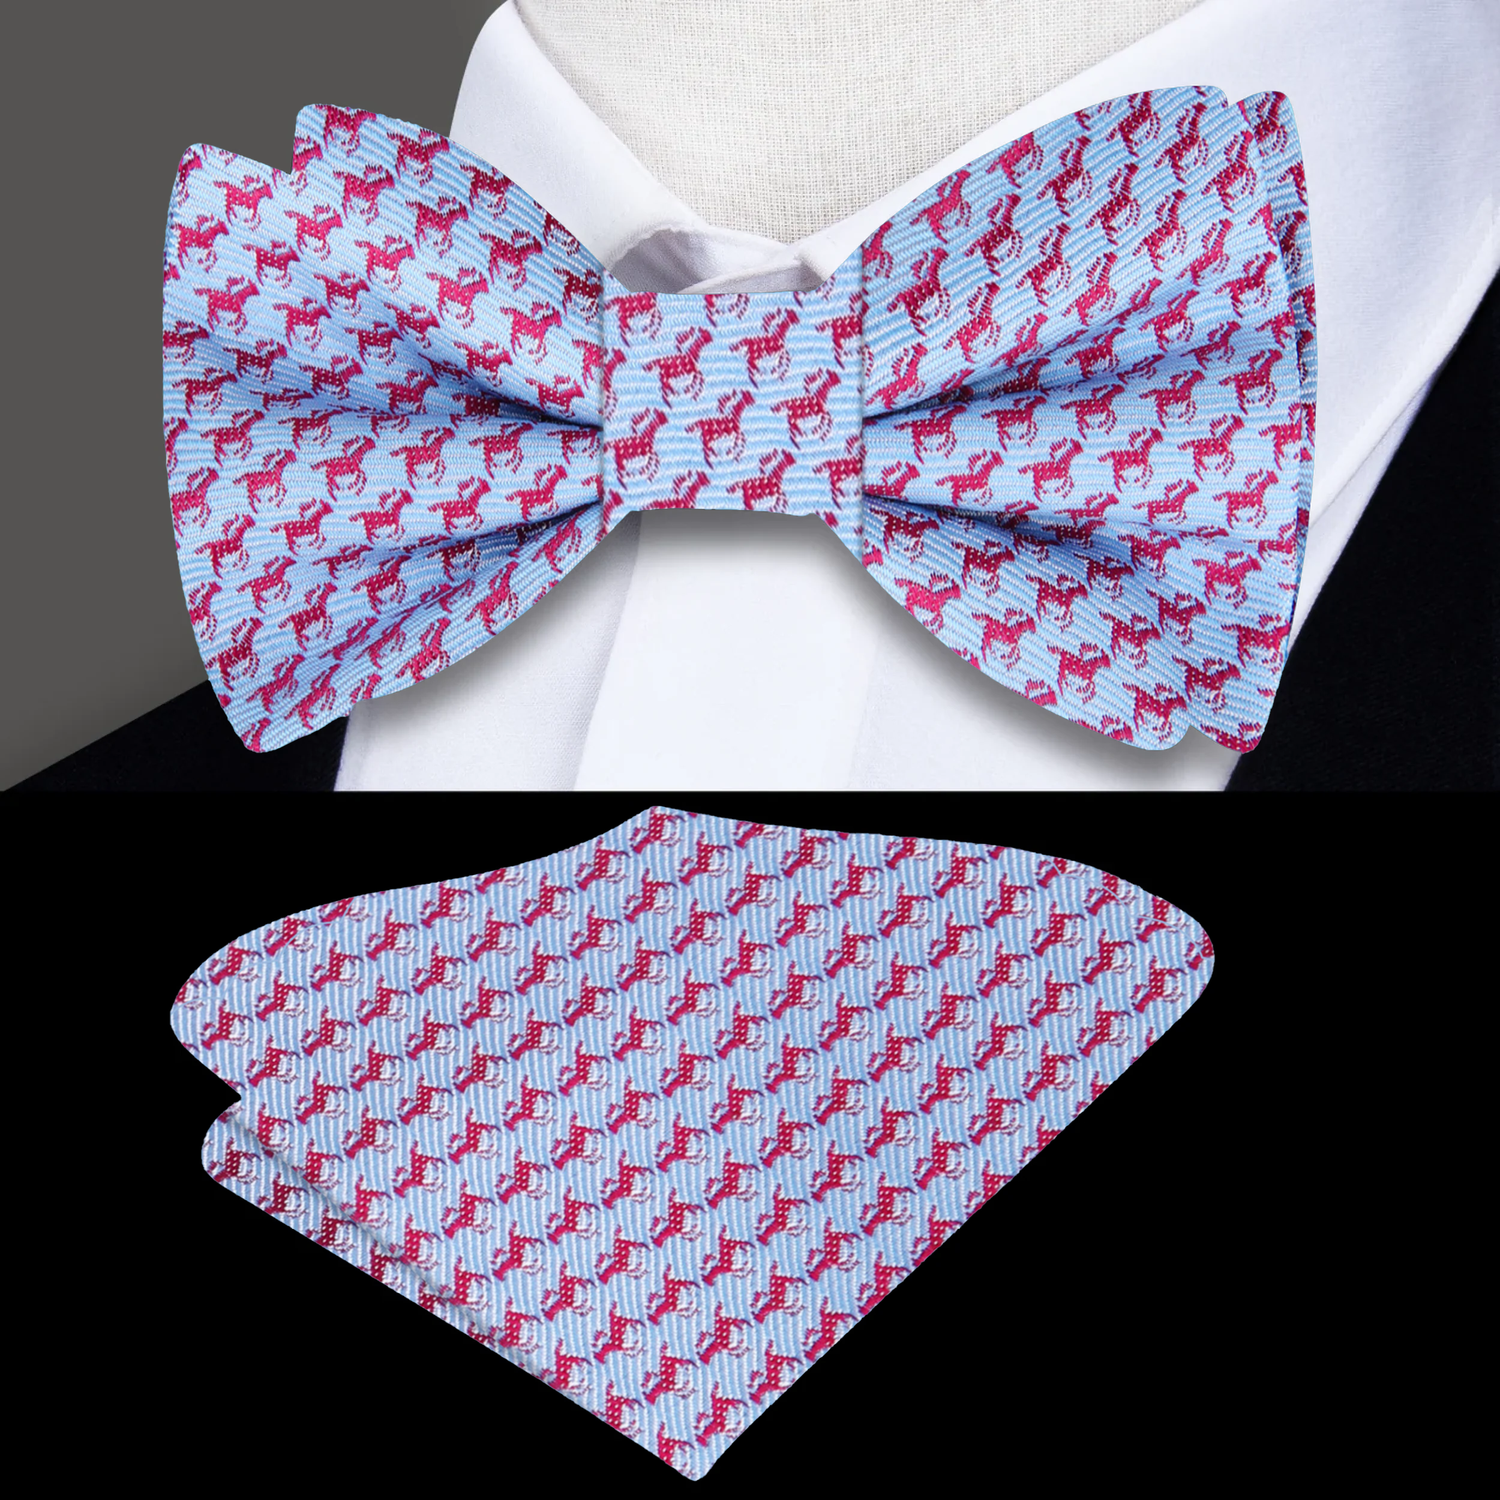 Main: Light Blue and Red Race Horses Bow Tie and Pocket Square